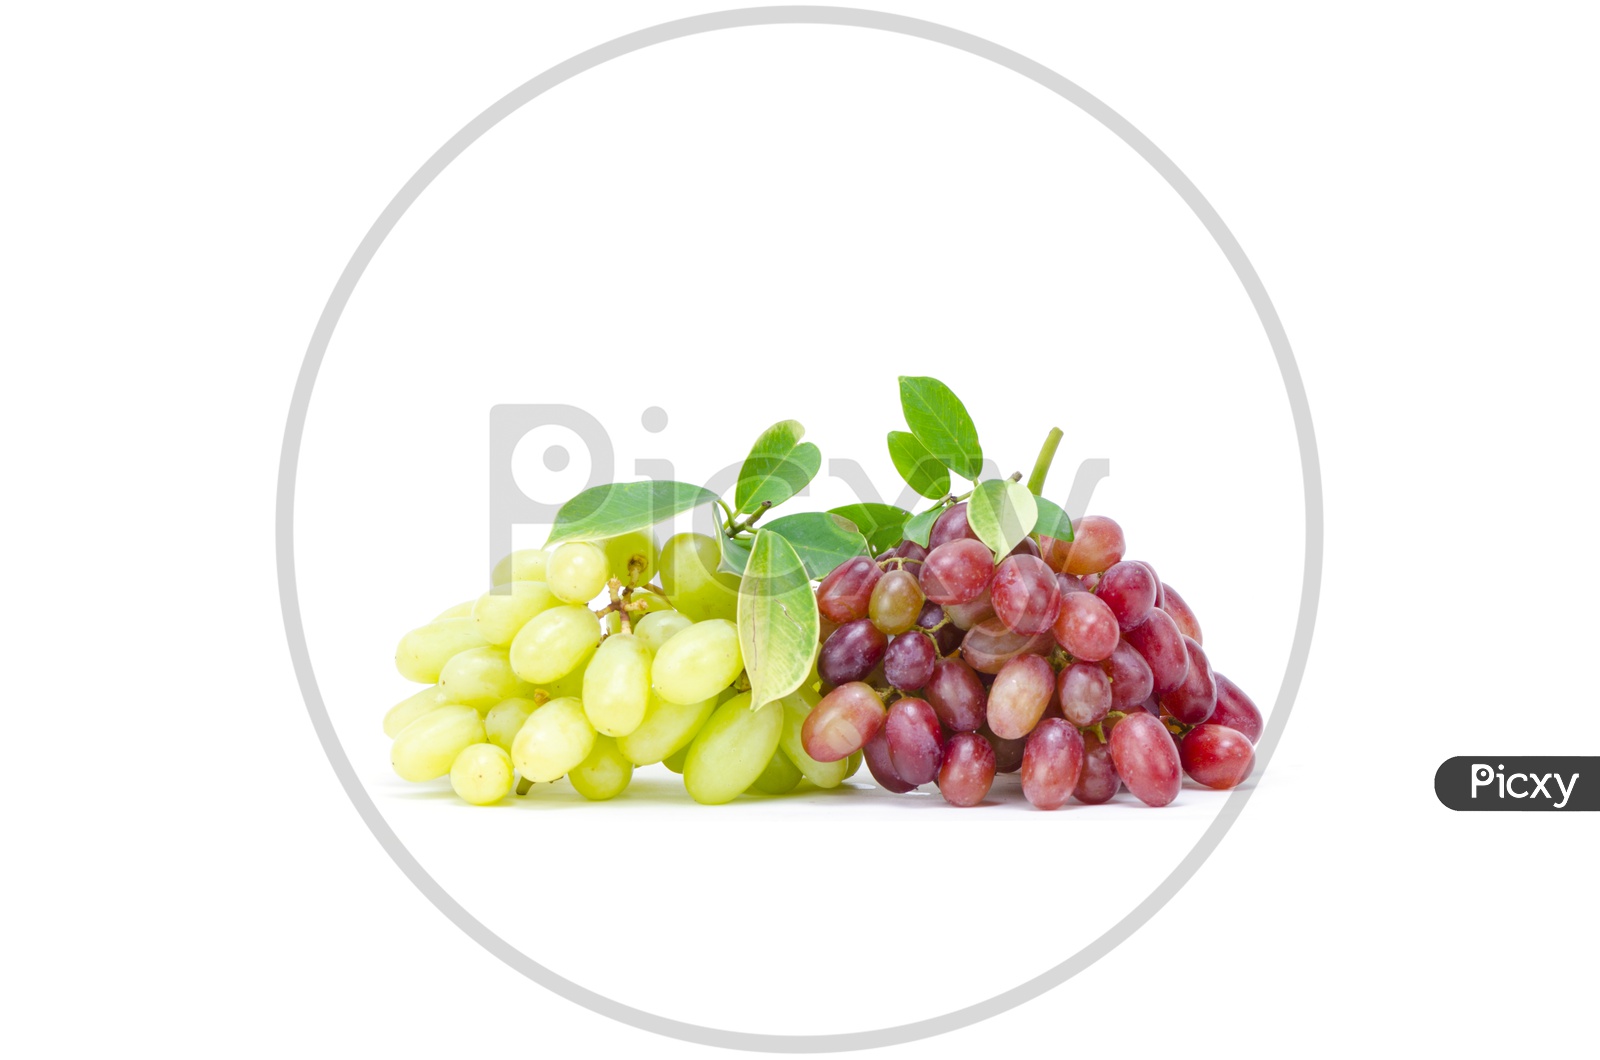 Green and red ripe grape isolated on the white background